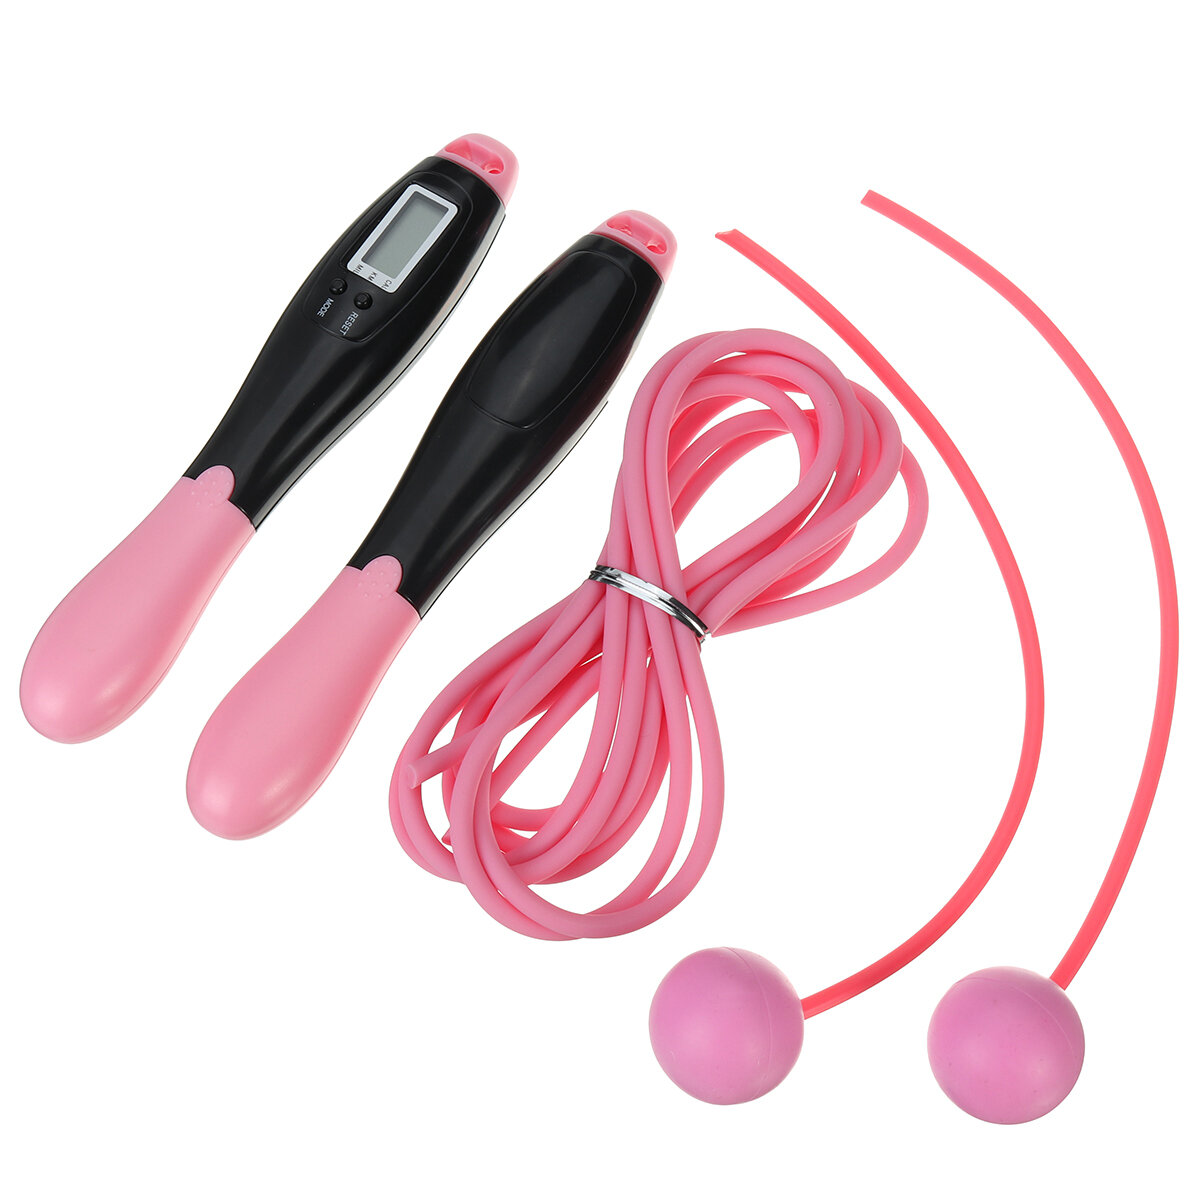 Adjustable Cordless Jump Rope Count Skipping Gym Bearing Speed Training Fitness Weight Reduce Tool